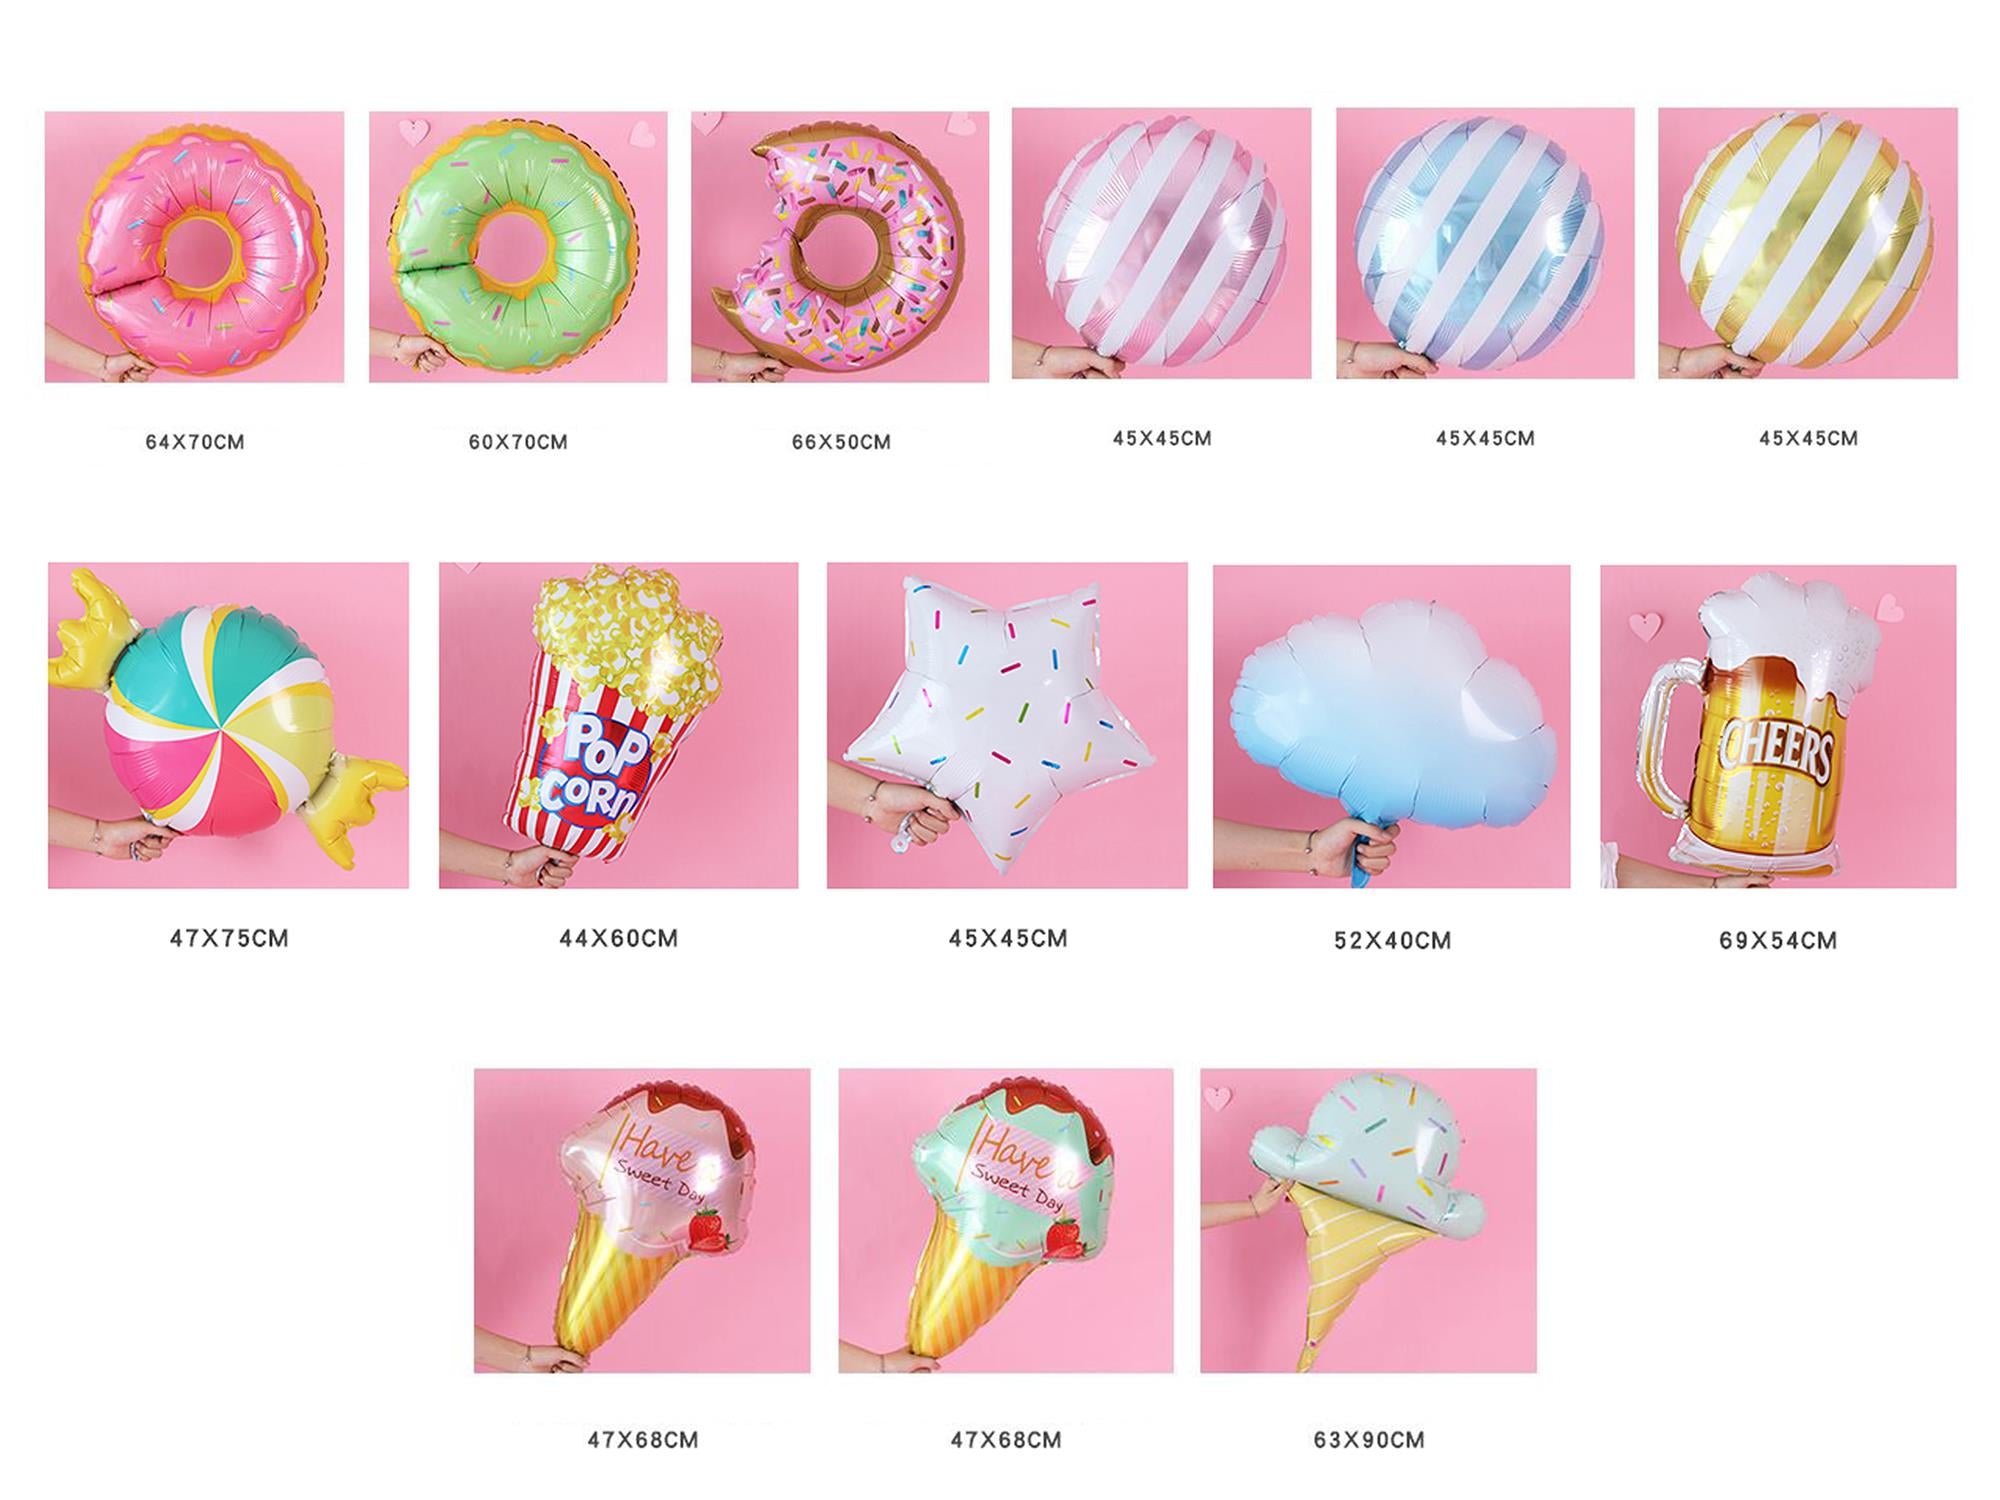 Kate Donut Candy Ice Cream Inflatable Props Set 14pcs